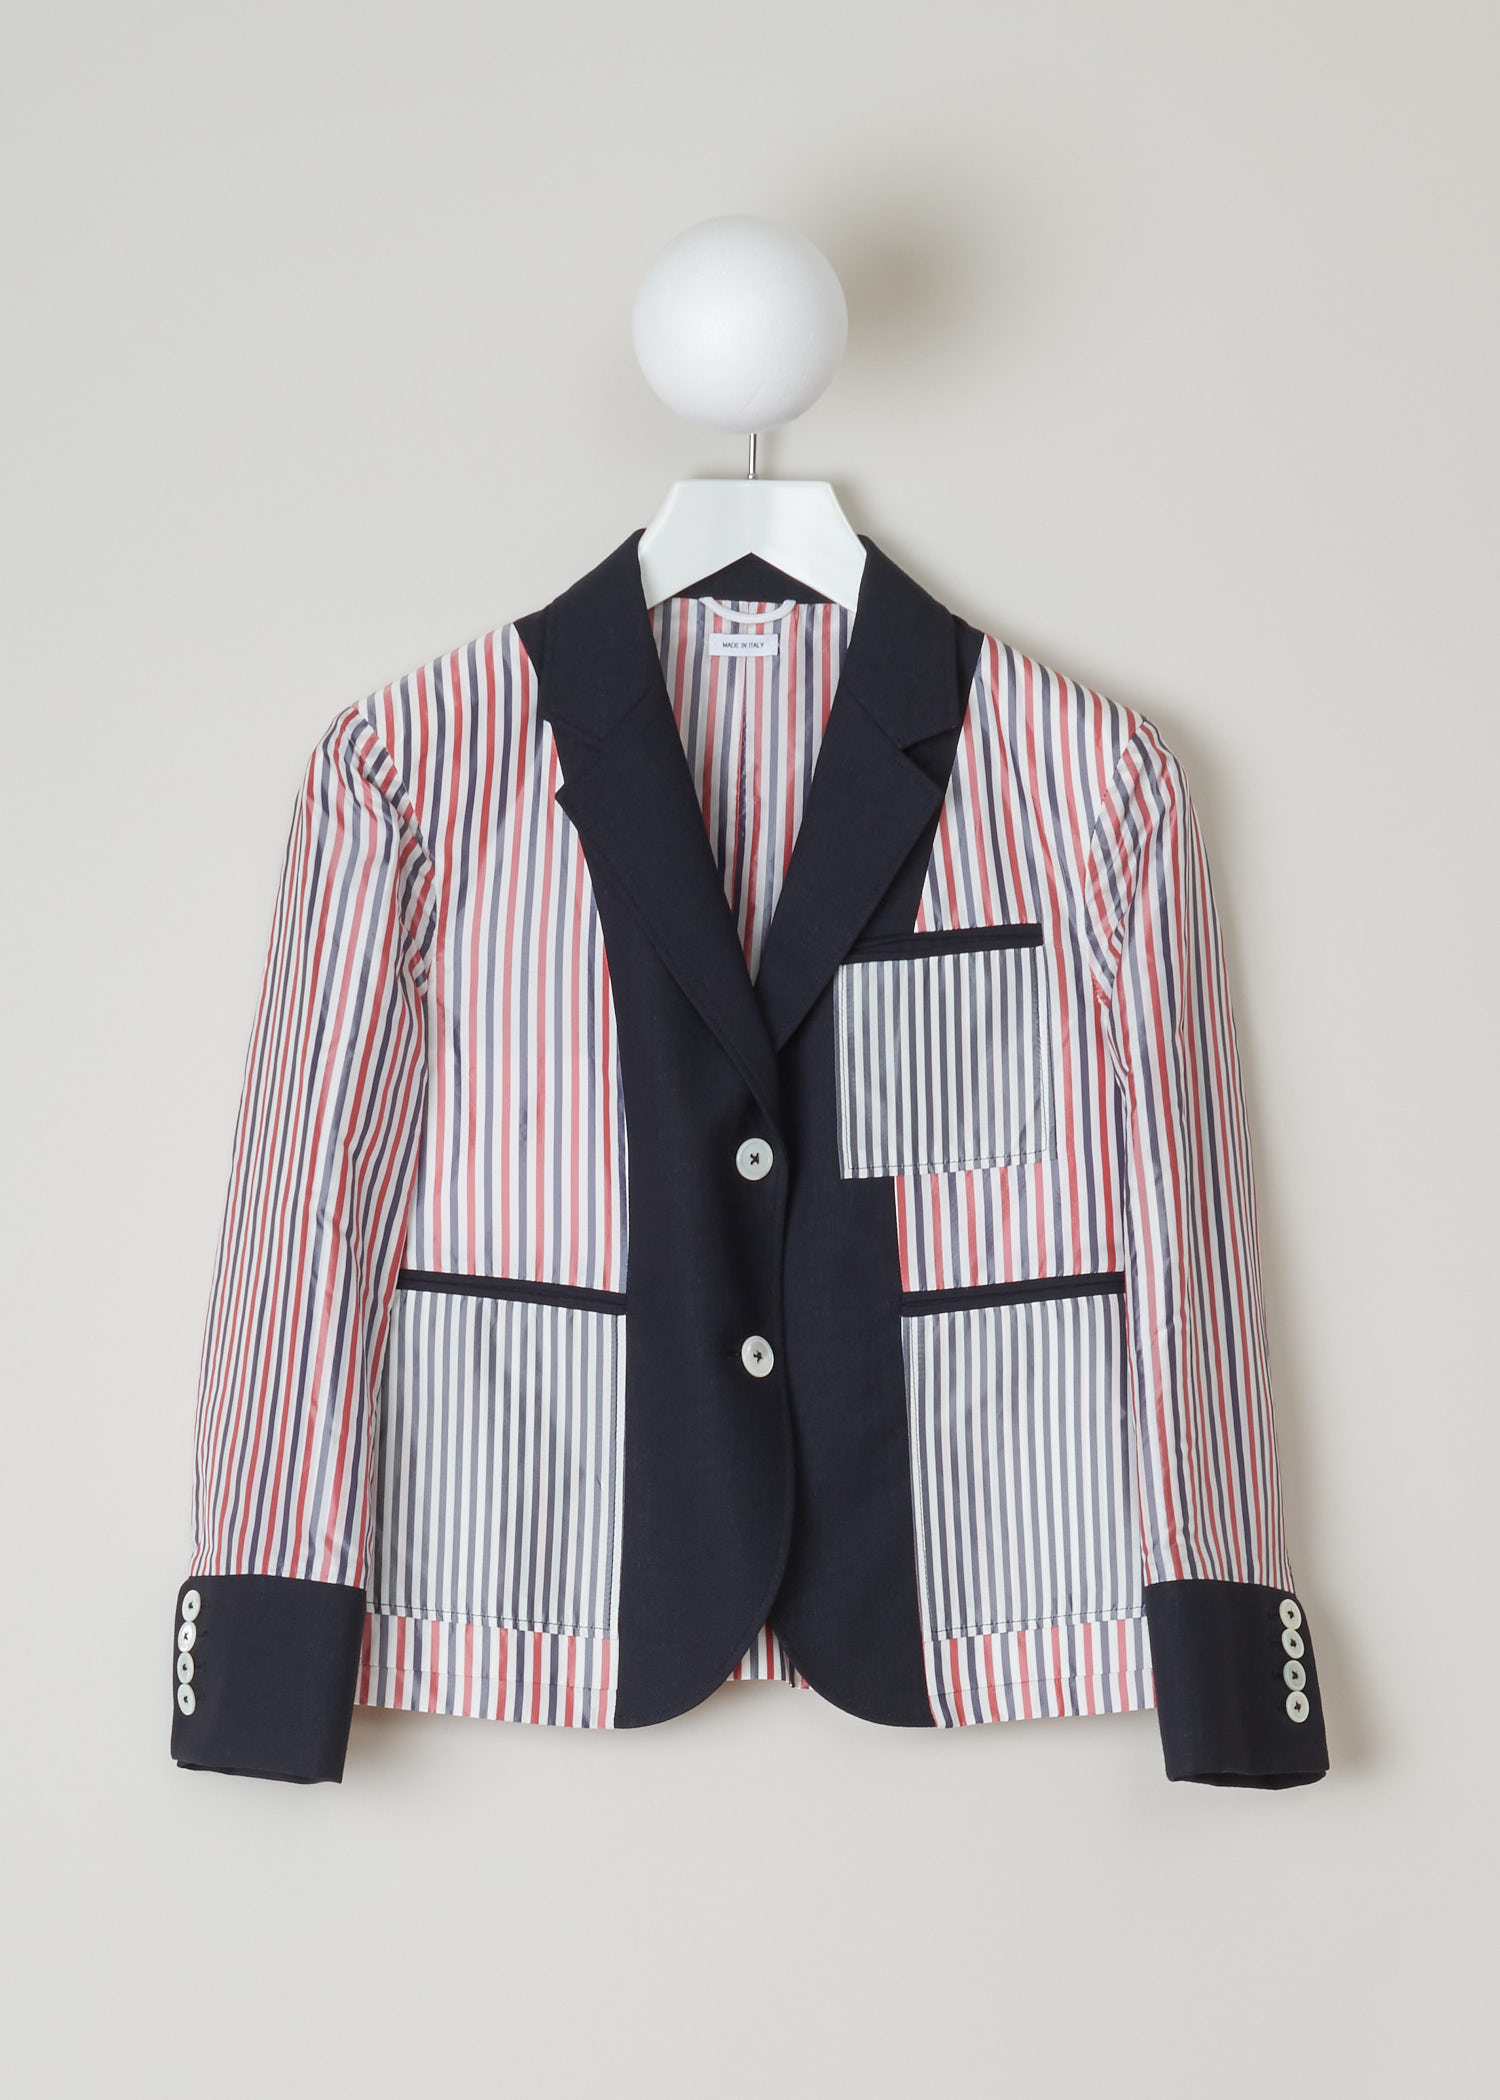 Thom Browne, Red and blue striped jacket, FBC510A_00473_415_navy, red white blue, front. This inside out jacket features a regular collar and a notched lapel. Going further down the long sleeves, you will find four buttoned cuffs. It has a single chest pocket and below that two jetted pockets. The jacket comes with the signature grosgrain  tab on the back.